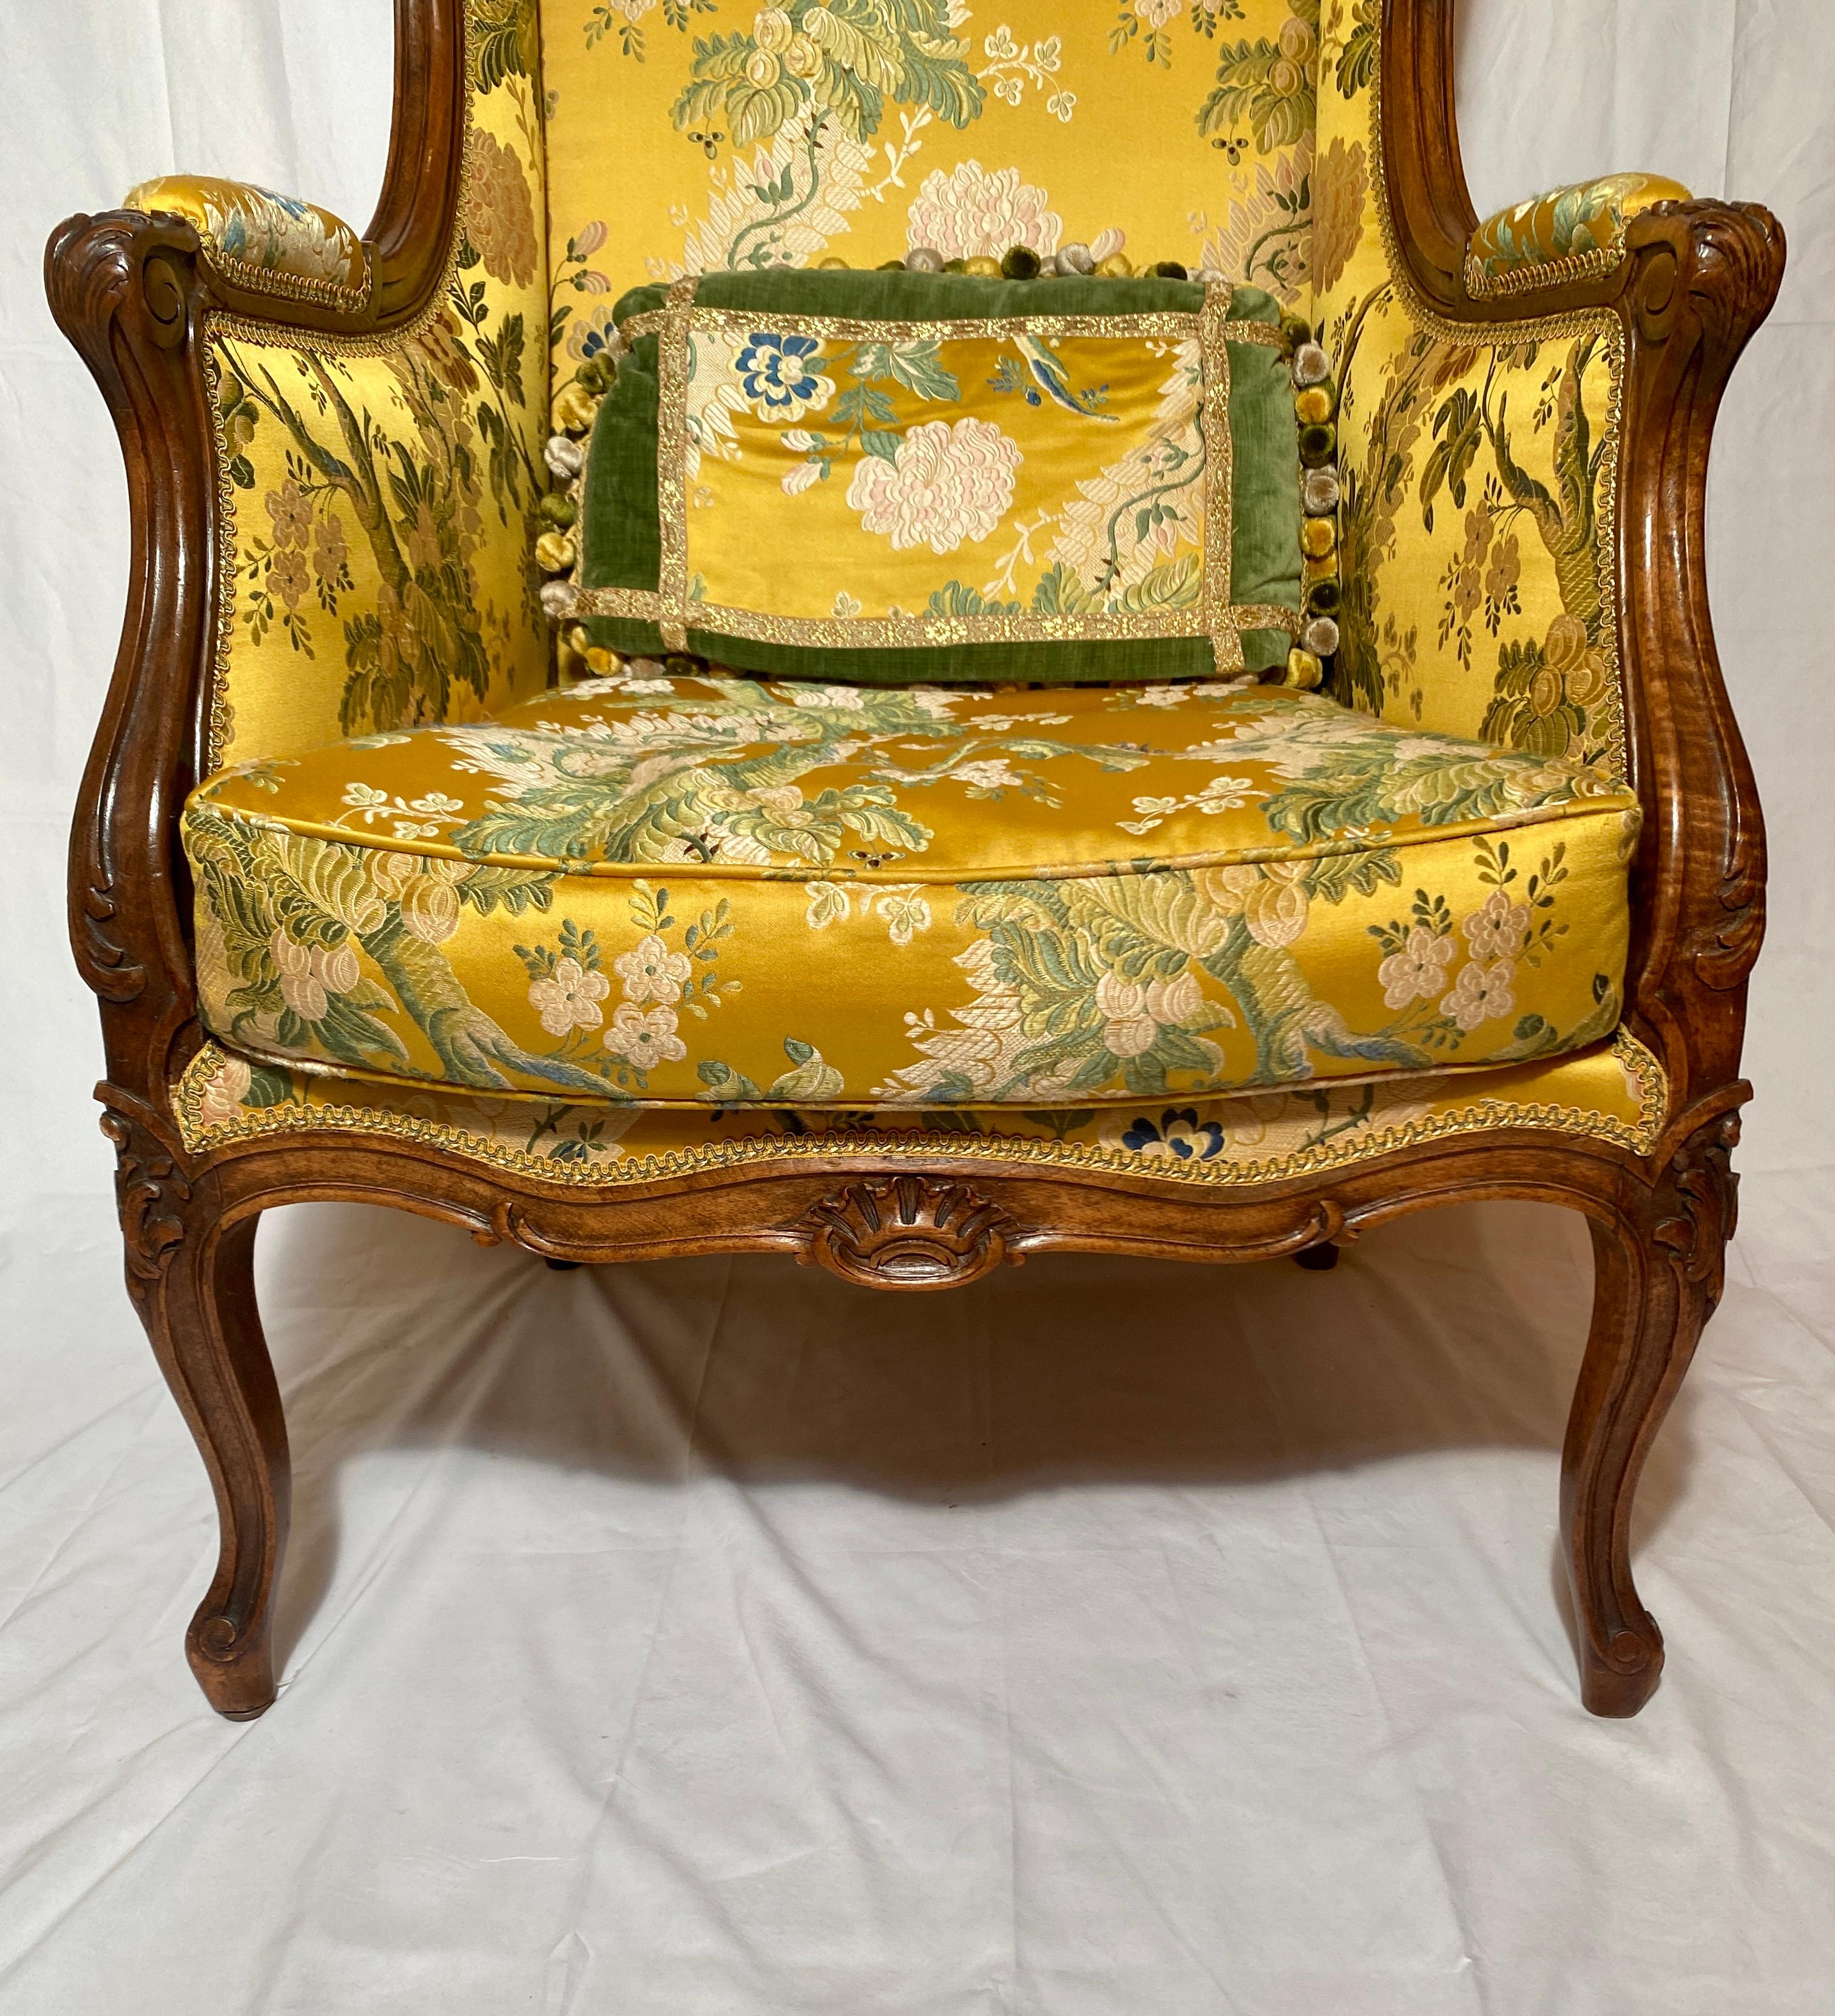 Pair antique French walnut wing chairs with fine yellow and green upholstery, circa 1860.